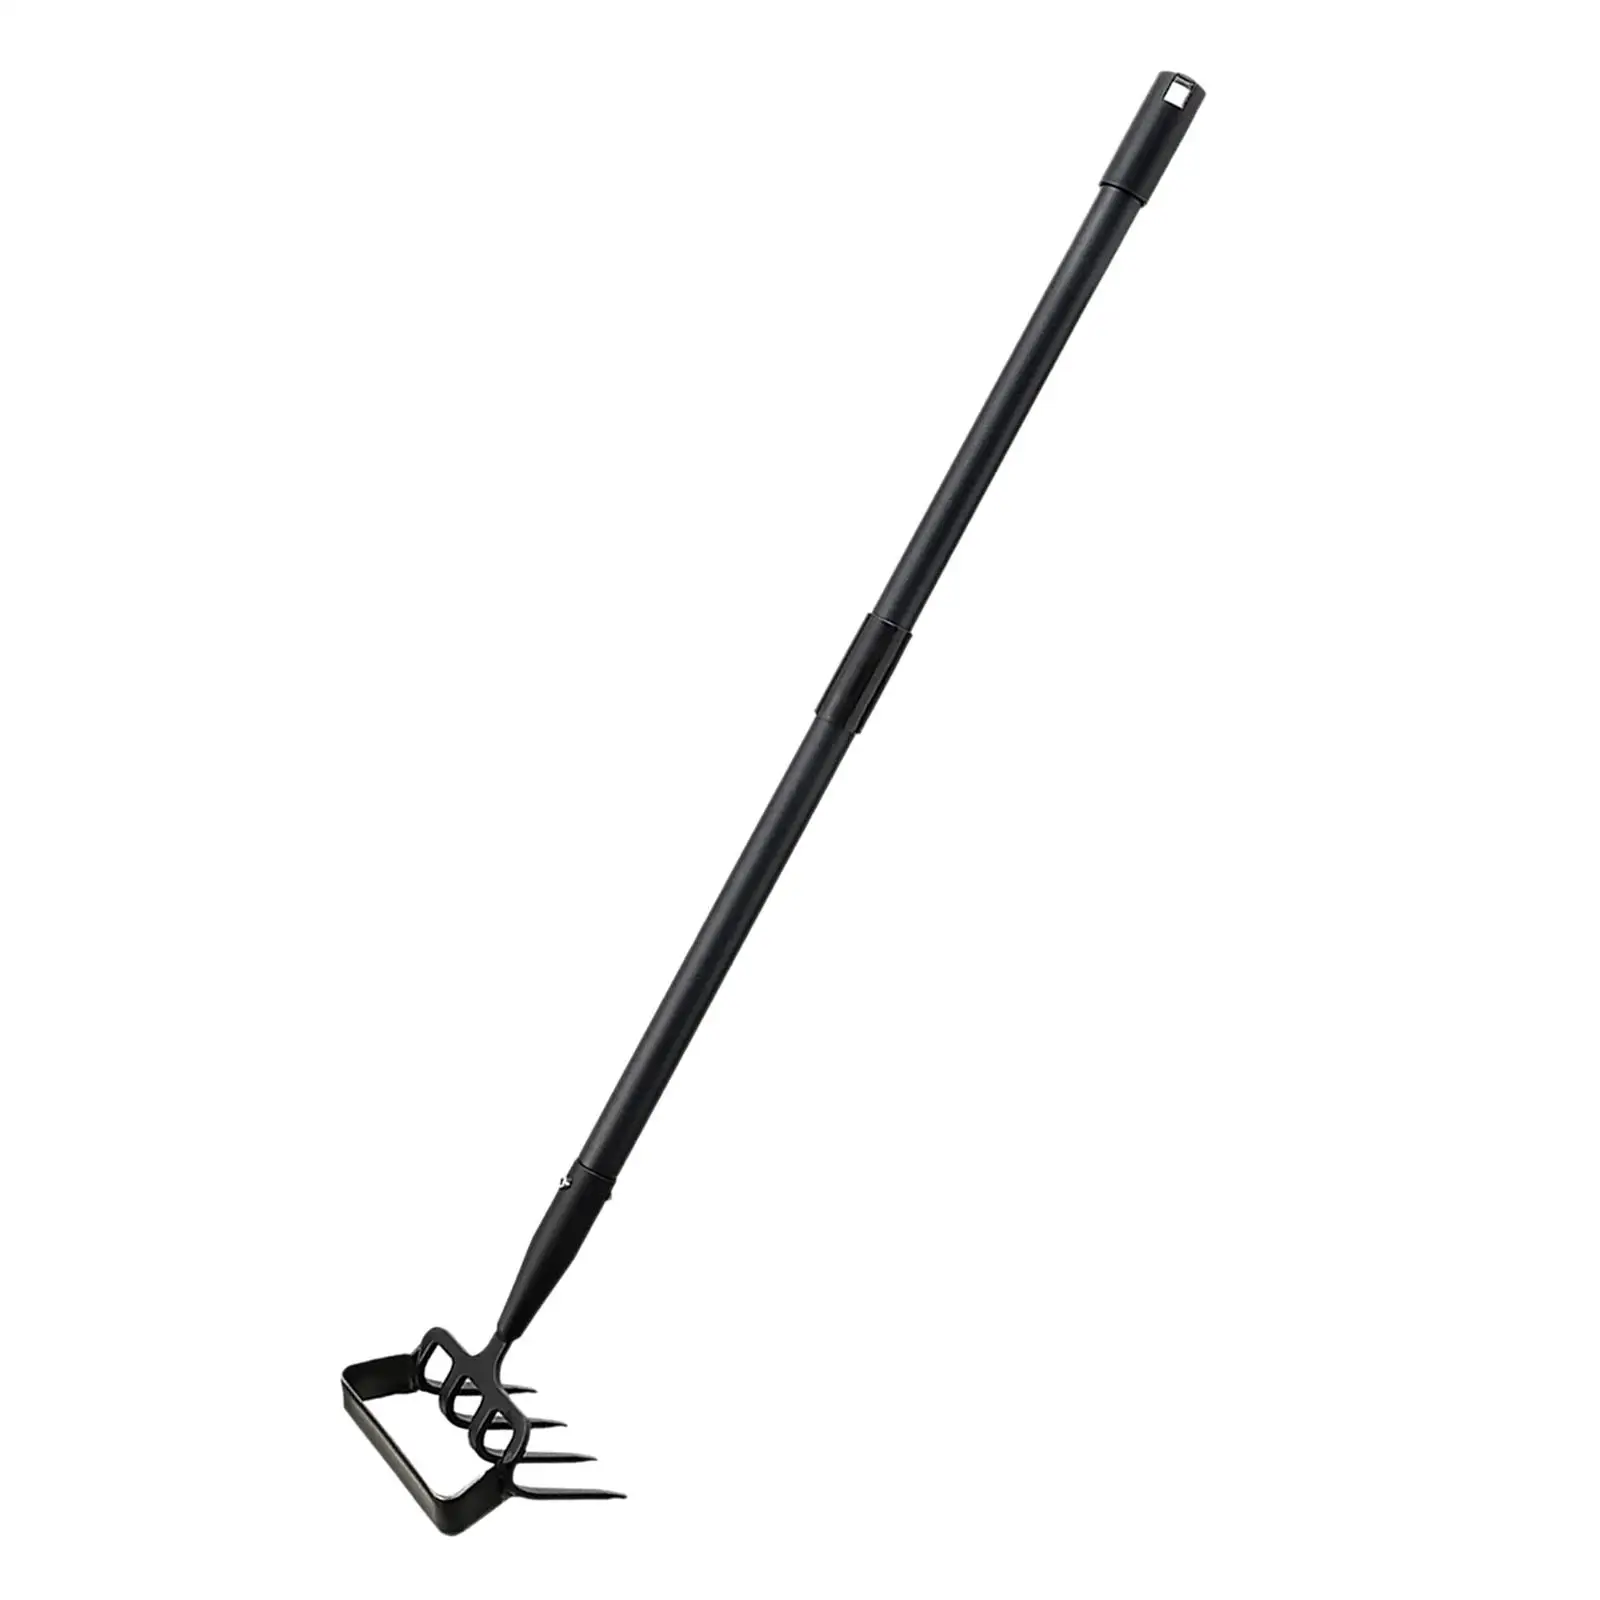 Stirrup Hoe and Cultivator Lightweight 2 in 1 with Long Handle Hoe Garden Tool for Loosening Planting Plowing Cultivating Lawn